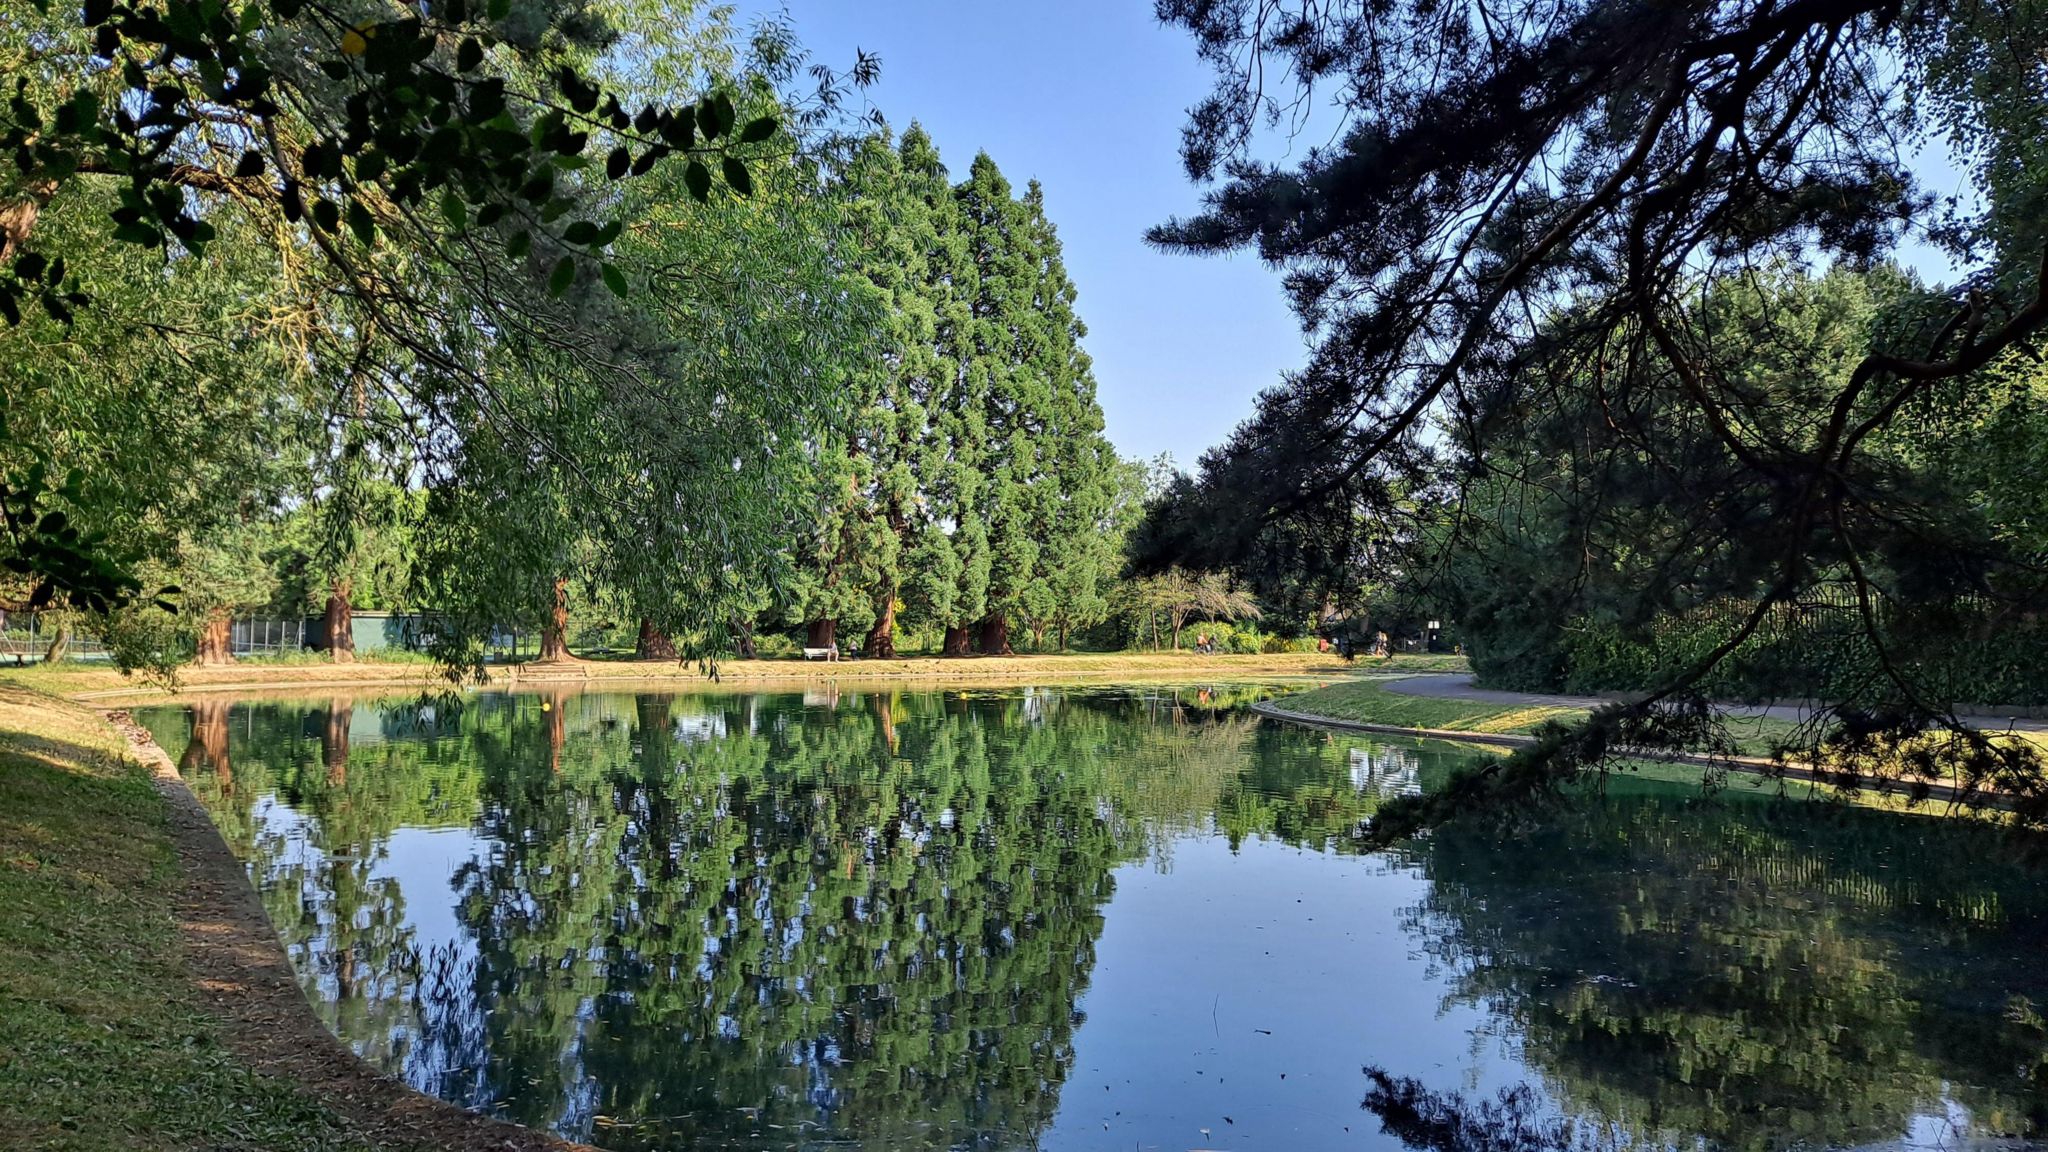 A pond in Oxford glistening in the sun and surrounded by trees, which are reflected in the water below